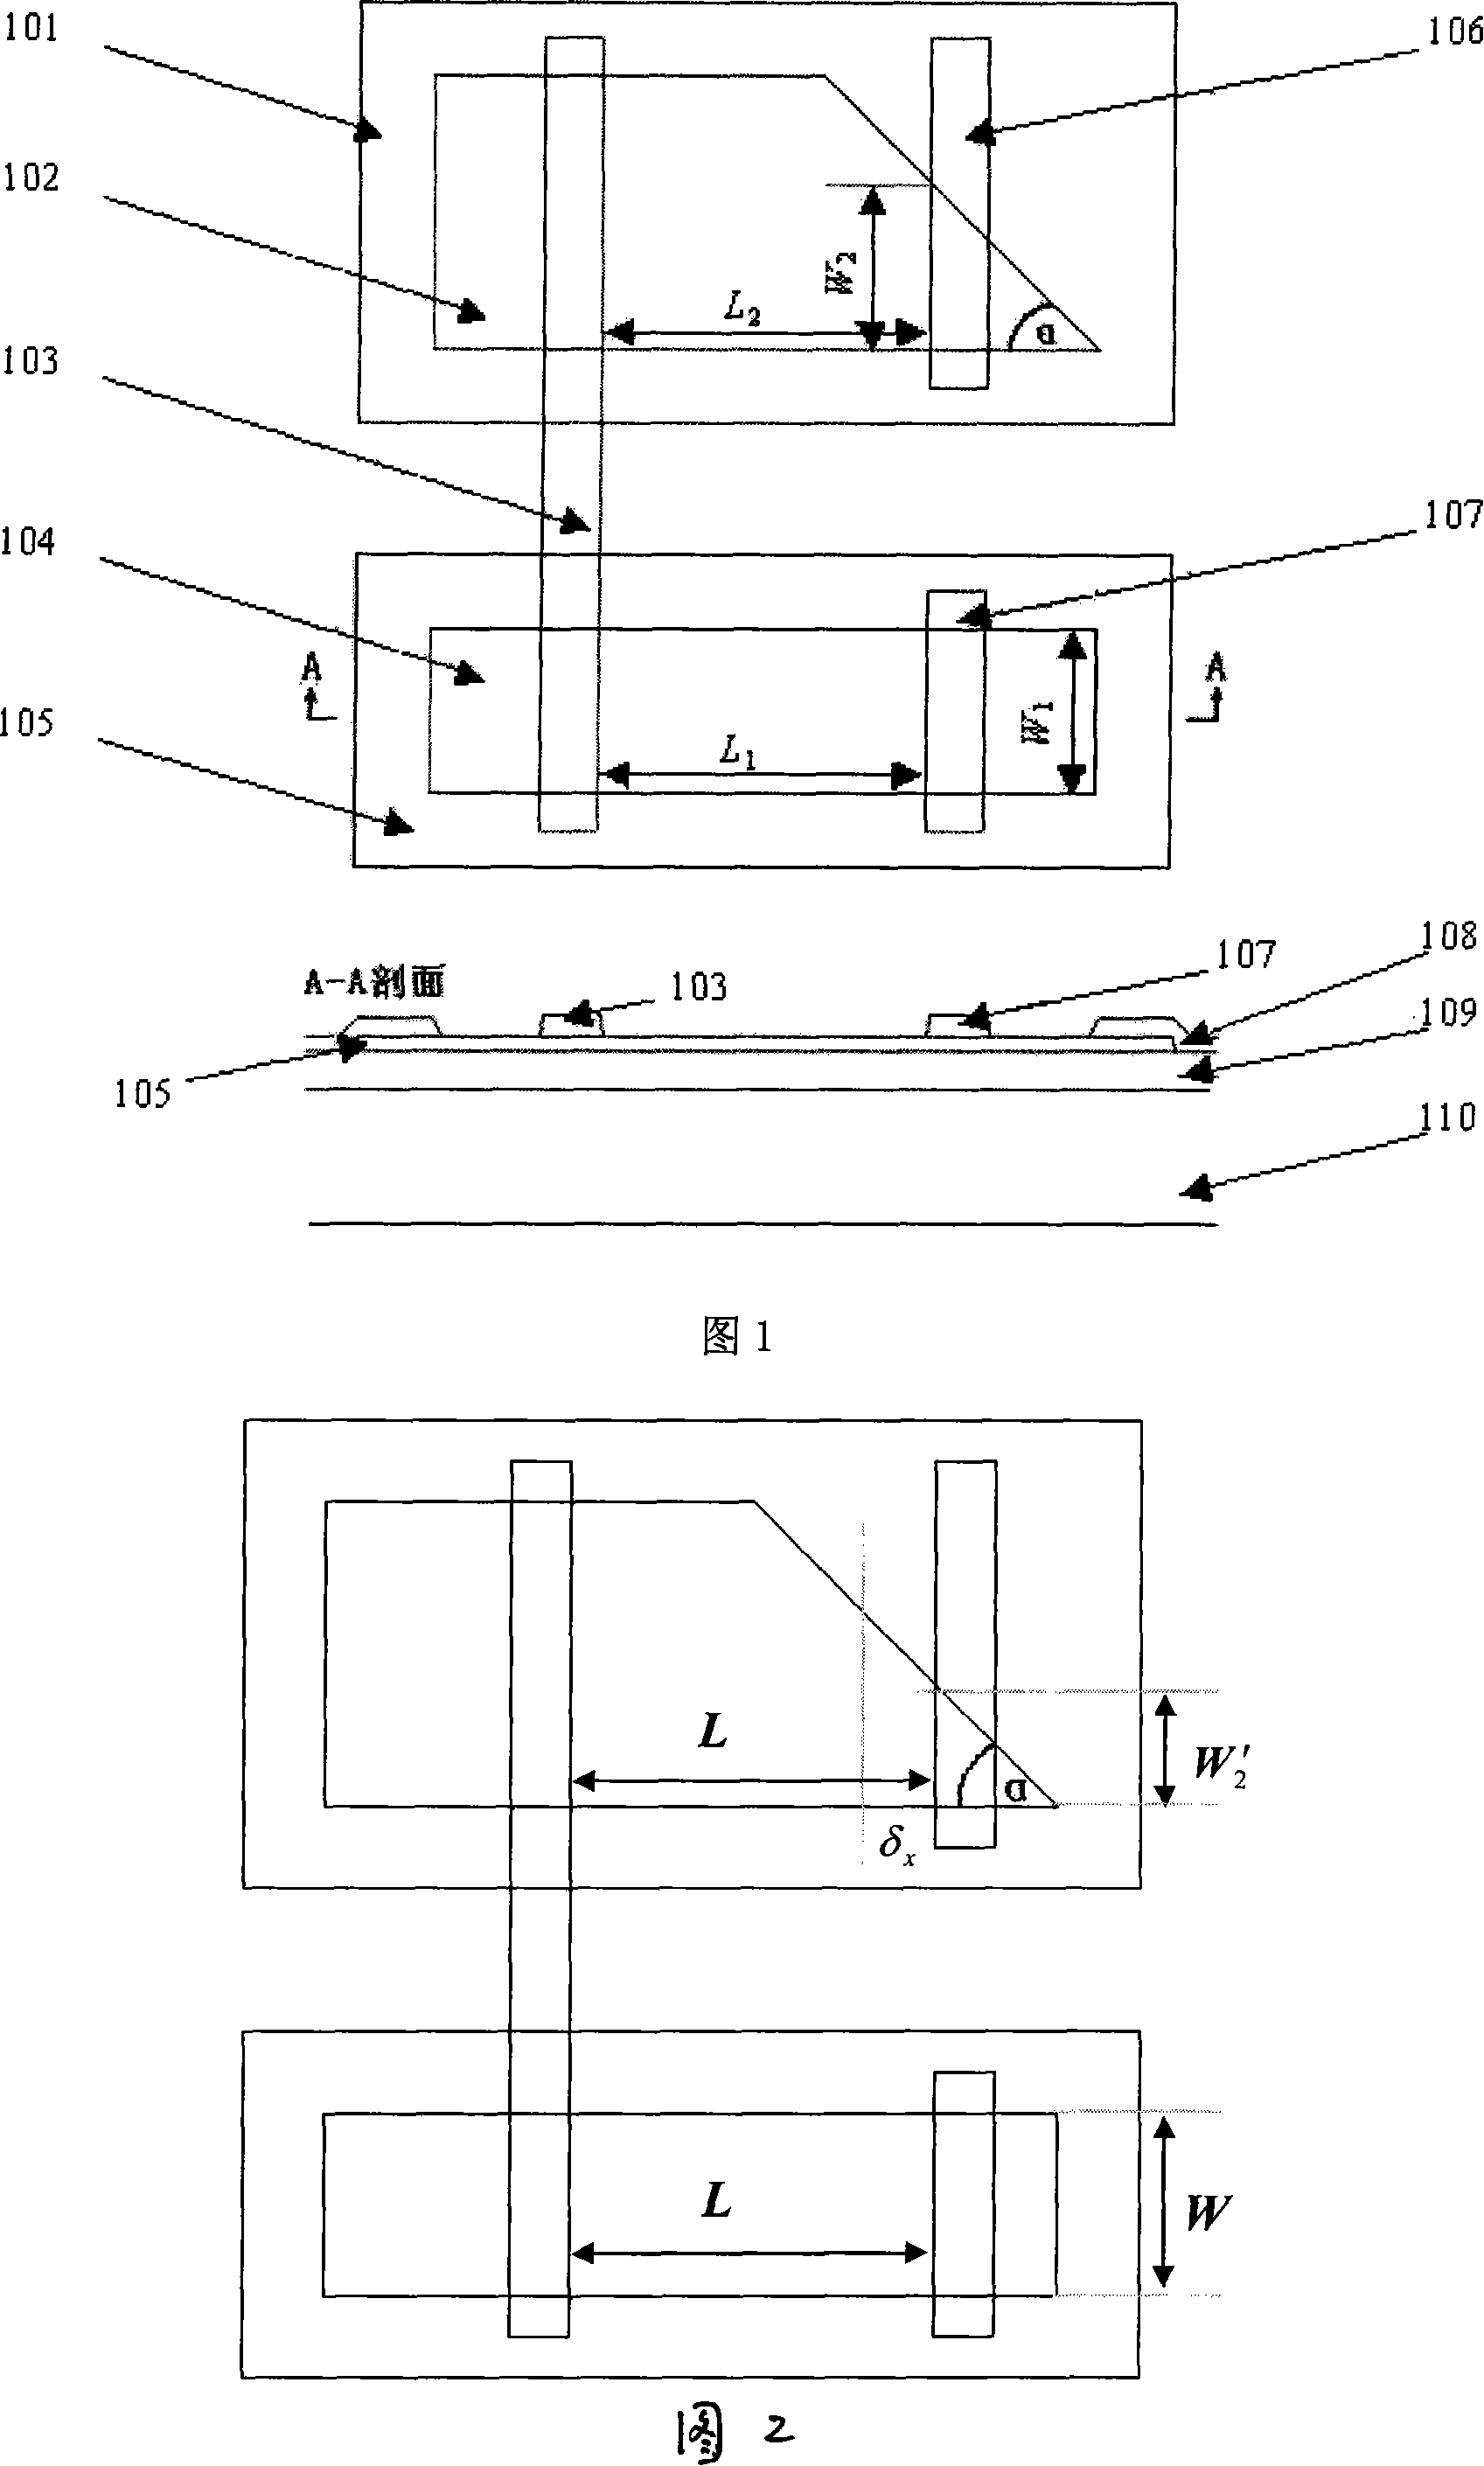 Metal layer and insulation layer graphic alignment error electricity testing structure in micromotor system apparatus process